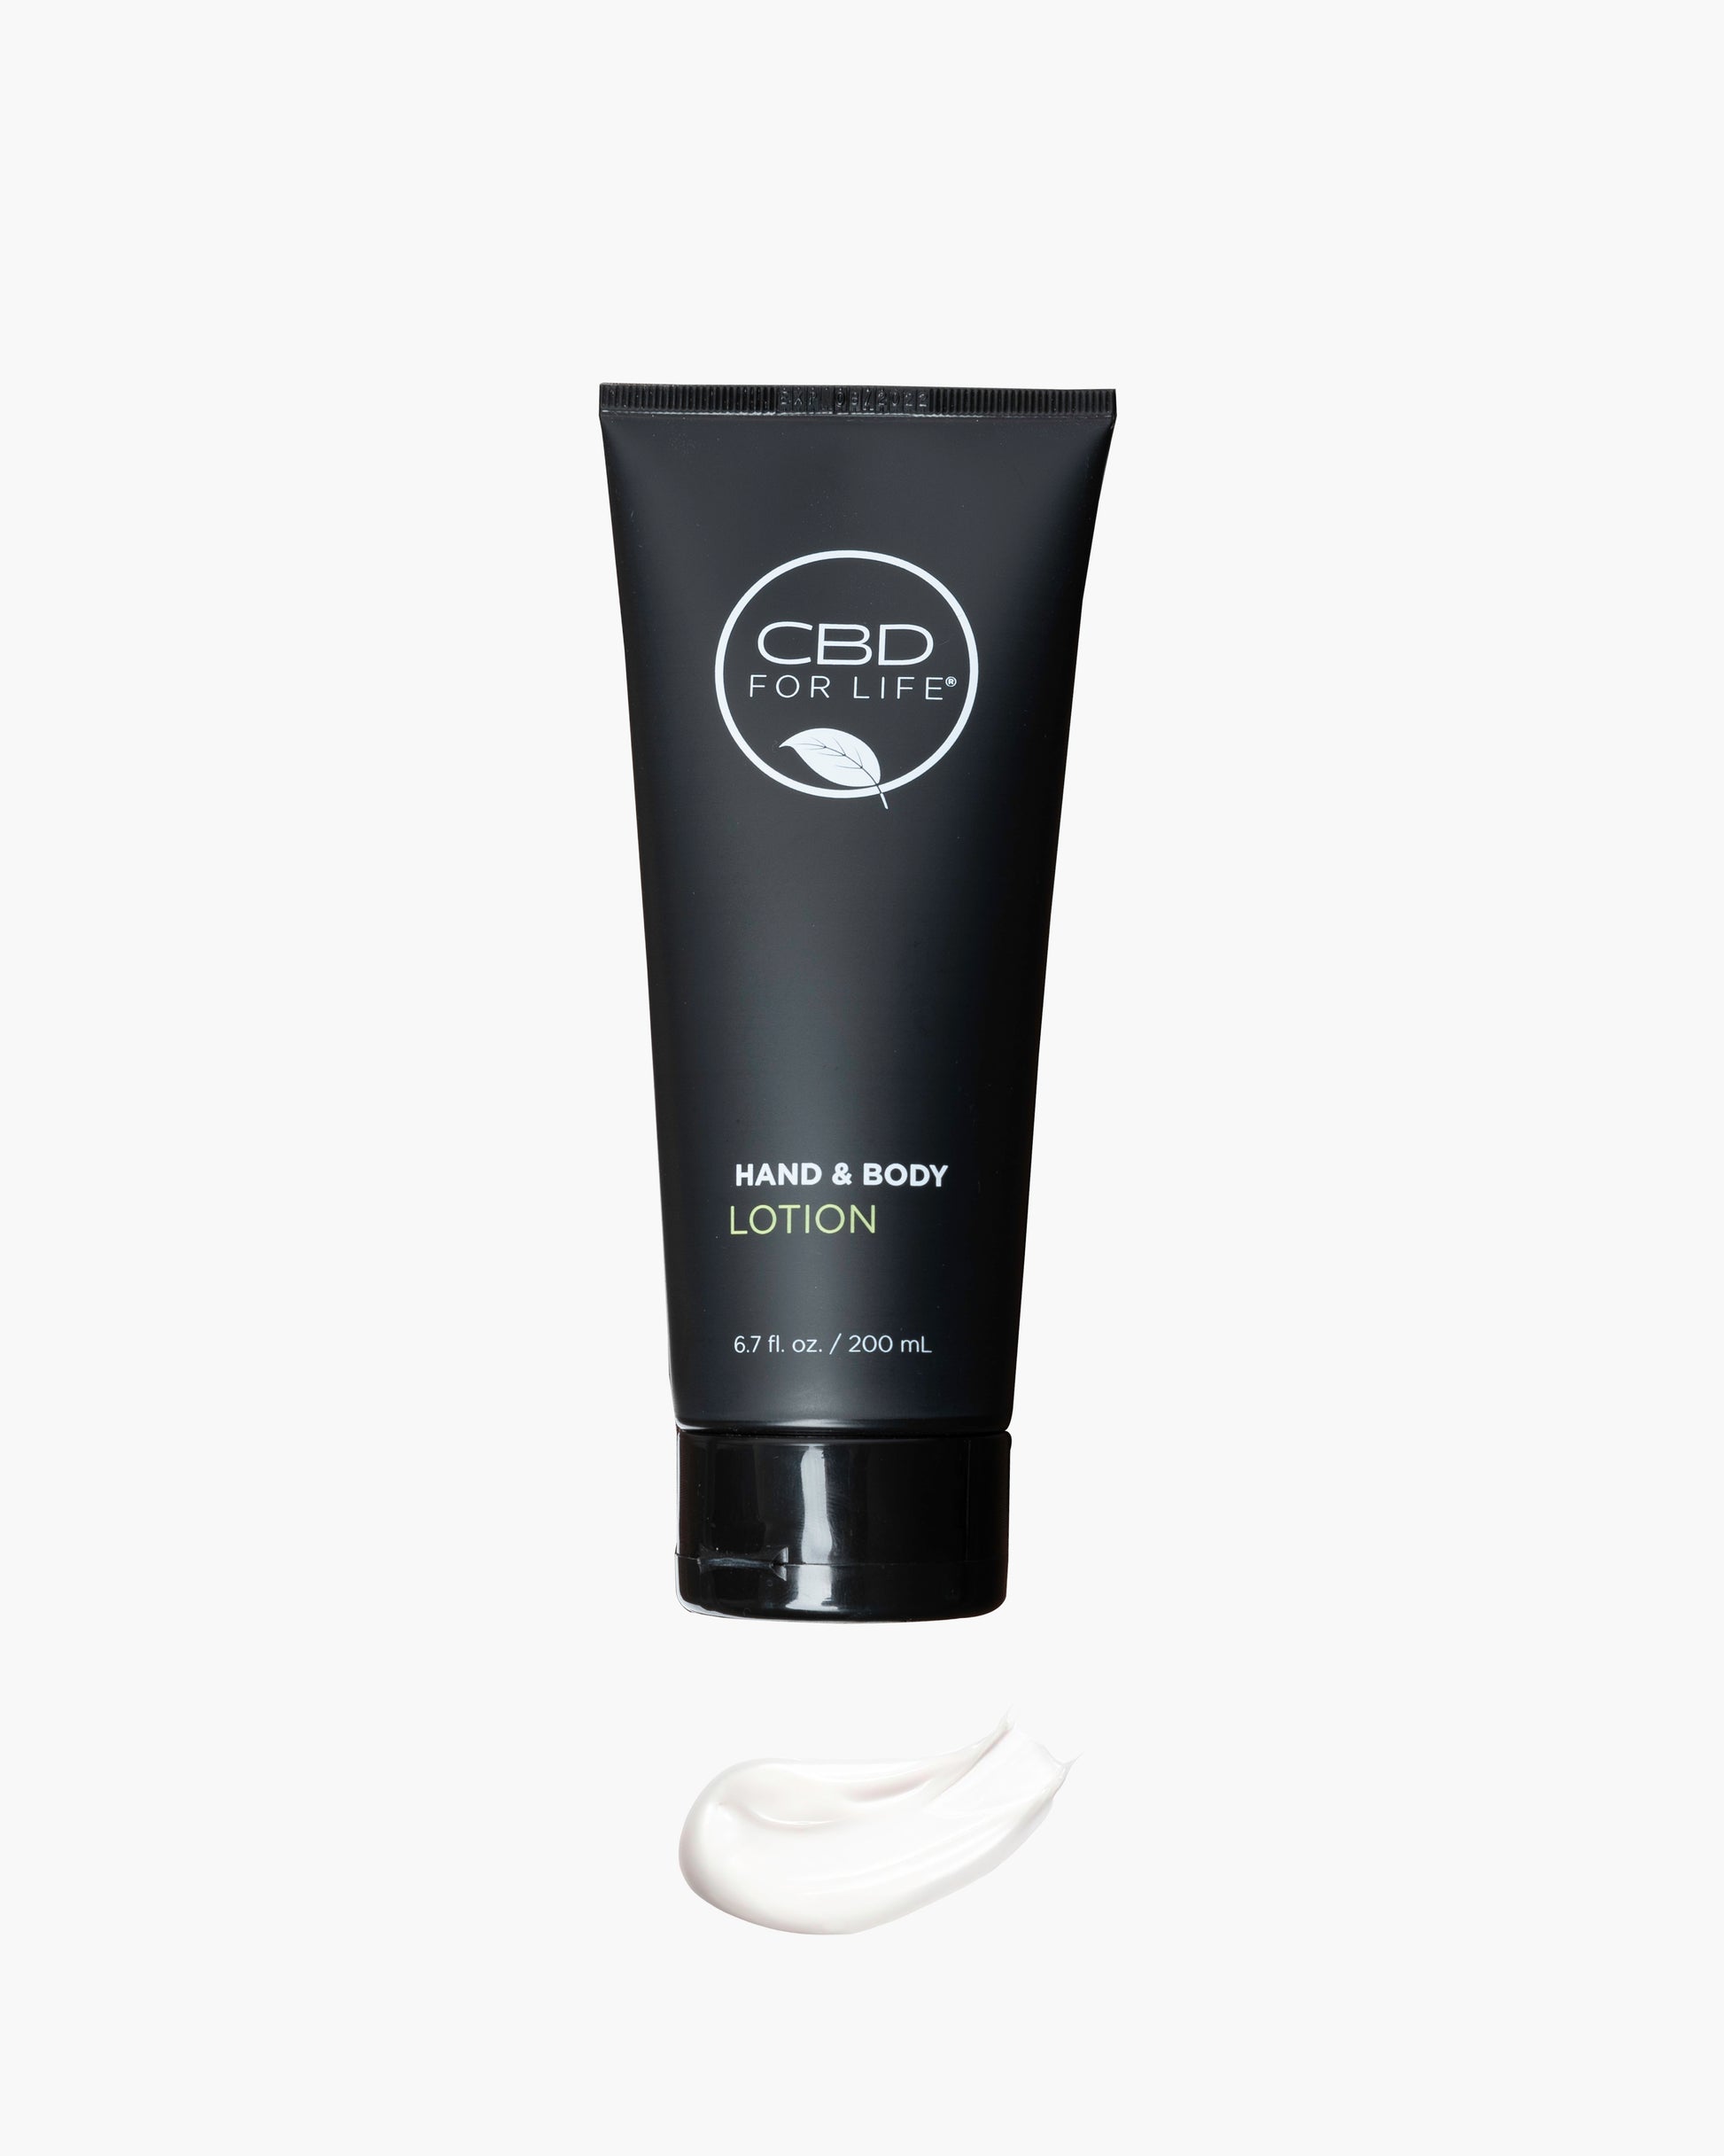 Your skin is your largest organ. And what you slather on it, soaks right in. Give it good the stuff, like CBD. It’s wildly beneficial for the skin—soothing, comforting, calming and protecting. The most moisturizing cbd product you will ever use.